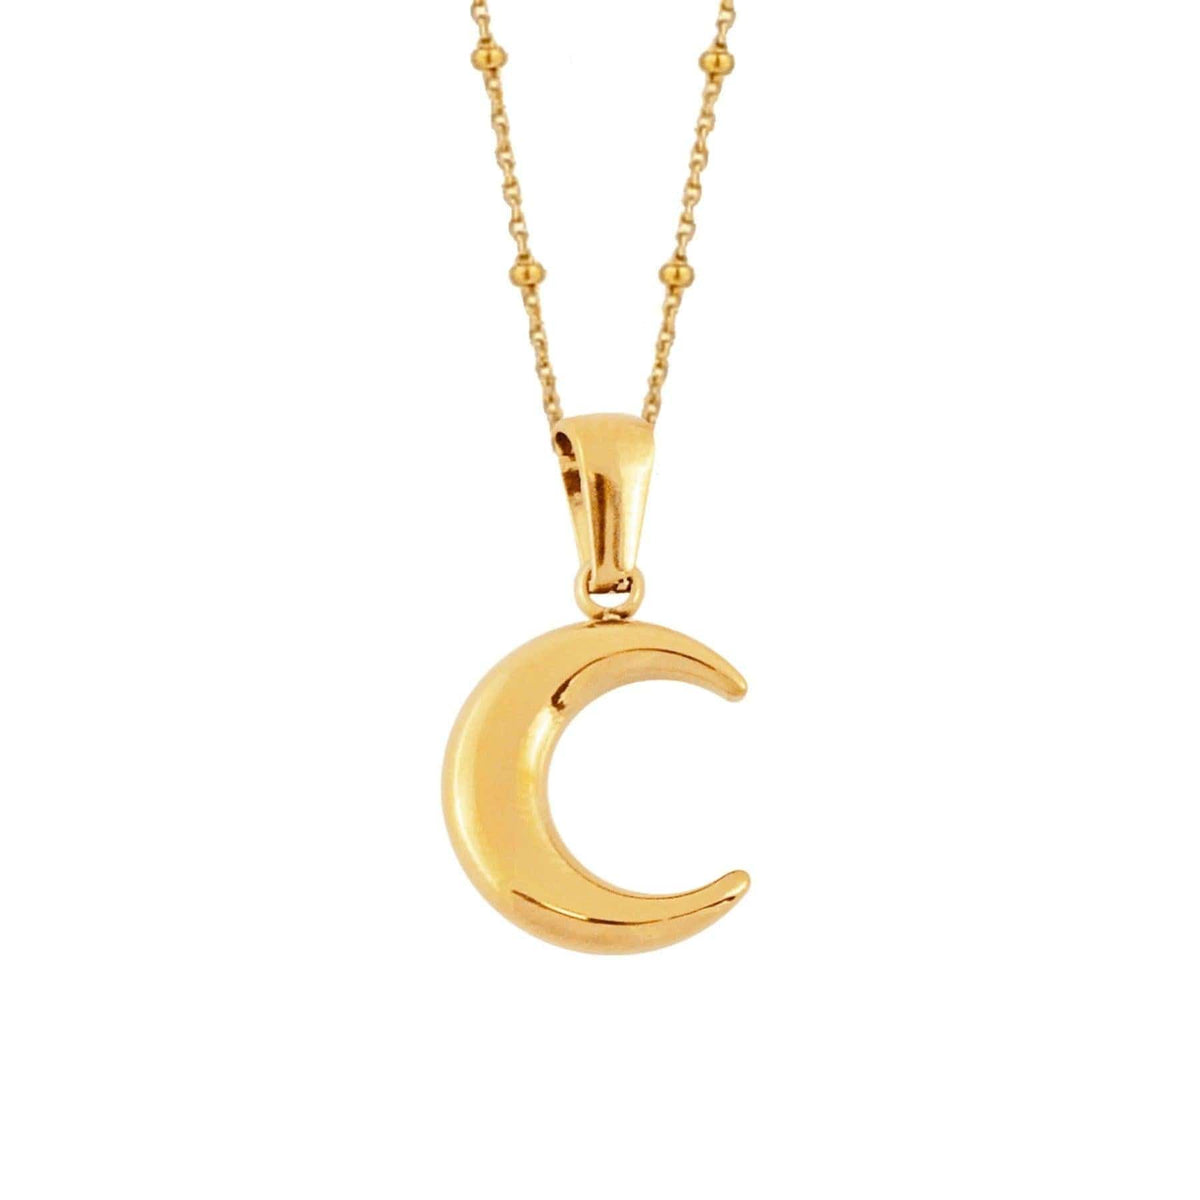 BOHOMOON Stainless Steel Moonlight Necklace Gold